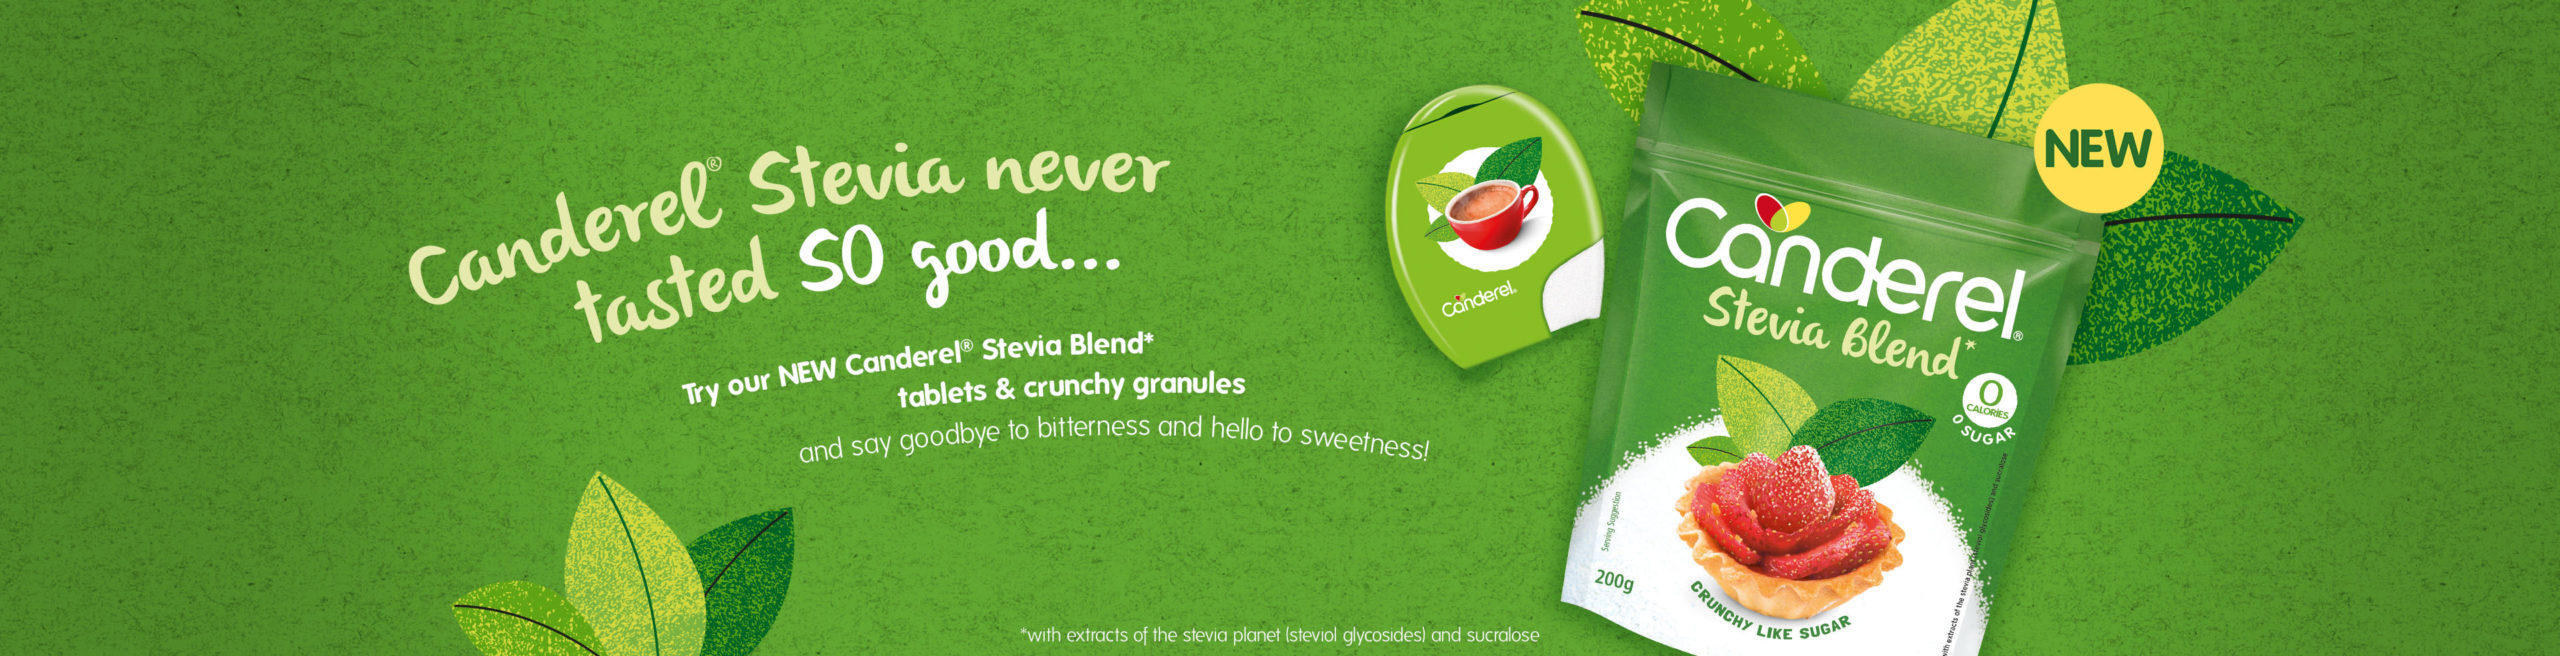 Canderel Stevia never tasted so good... Try our new Canderel Stevia Blend tablets & crunchy granules and say goodbye to bitterness and hello to sweetness! Packshots on green natural background